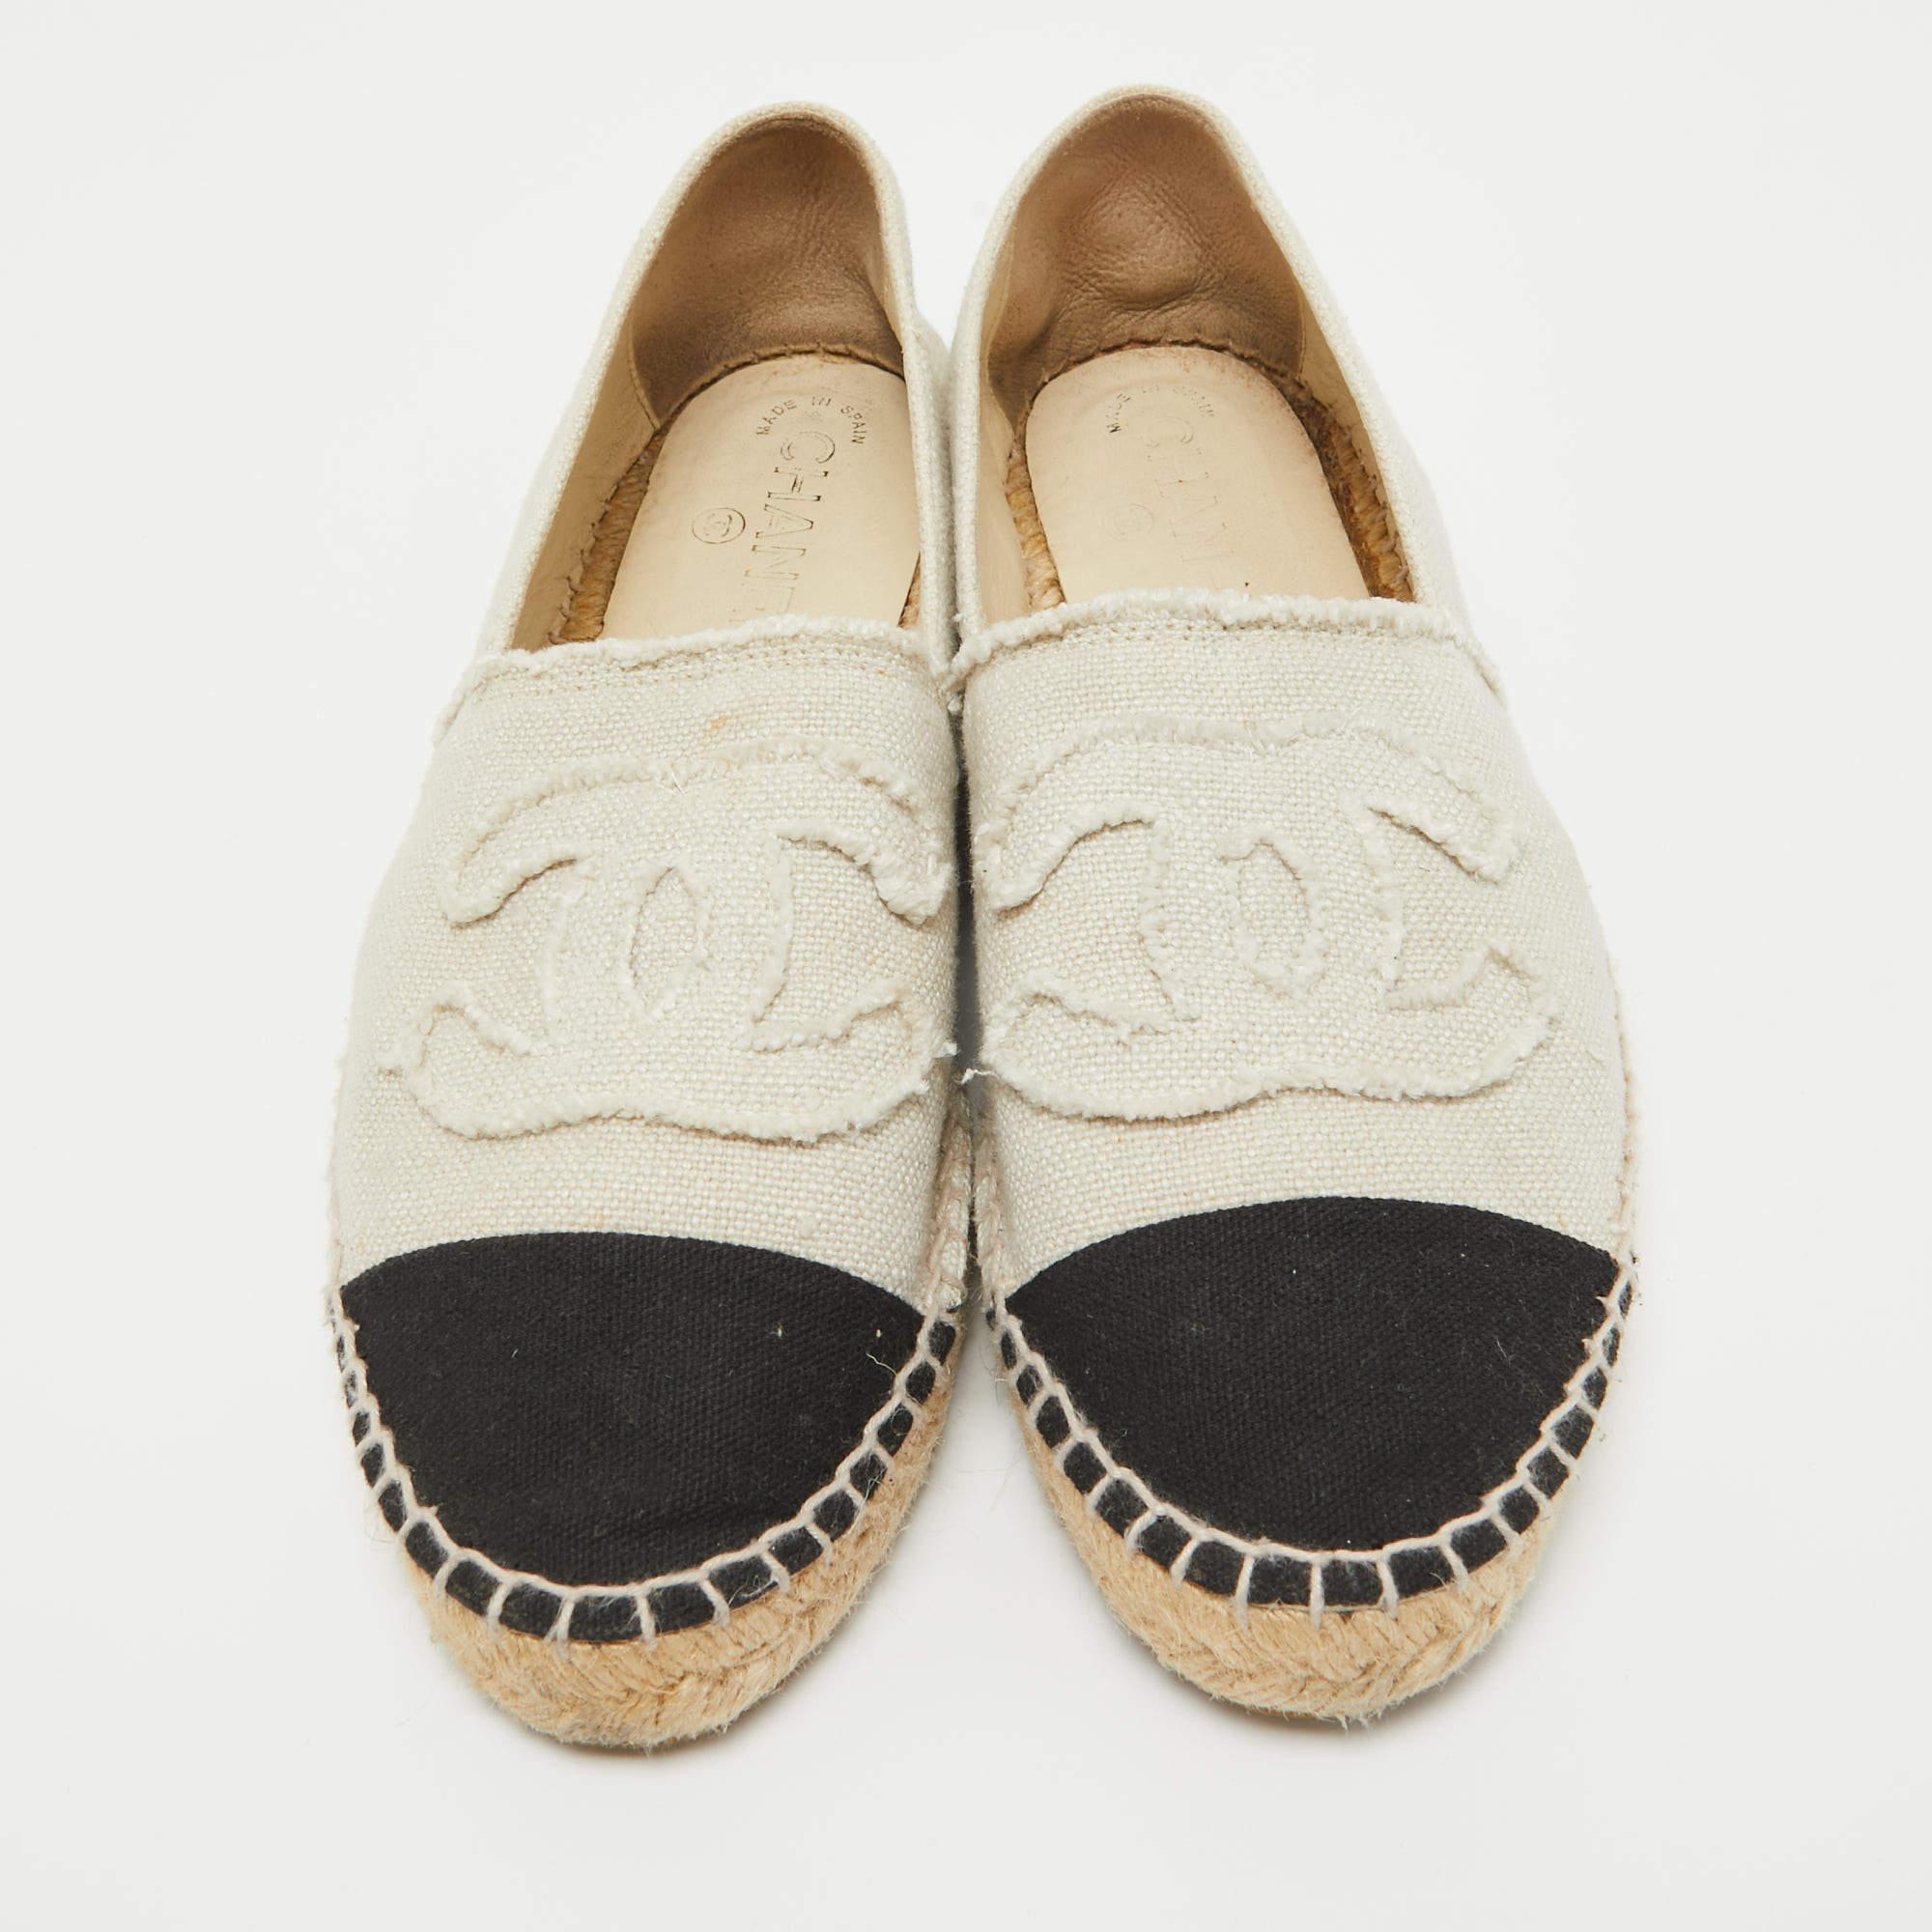 Let this comfortable pair be your first choice when you're out for a long day. These Chanel espadrilles have well-sewn uppers beautifully set on durable soles.

